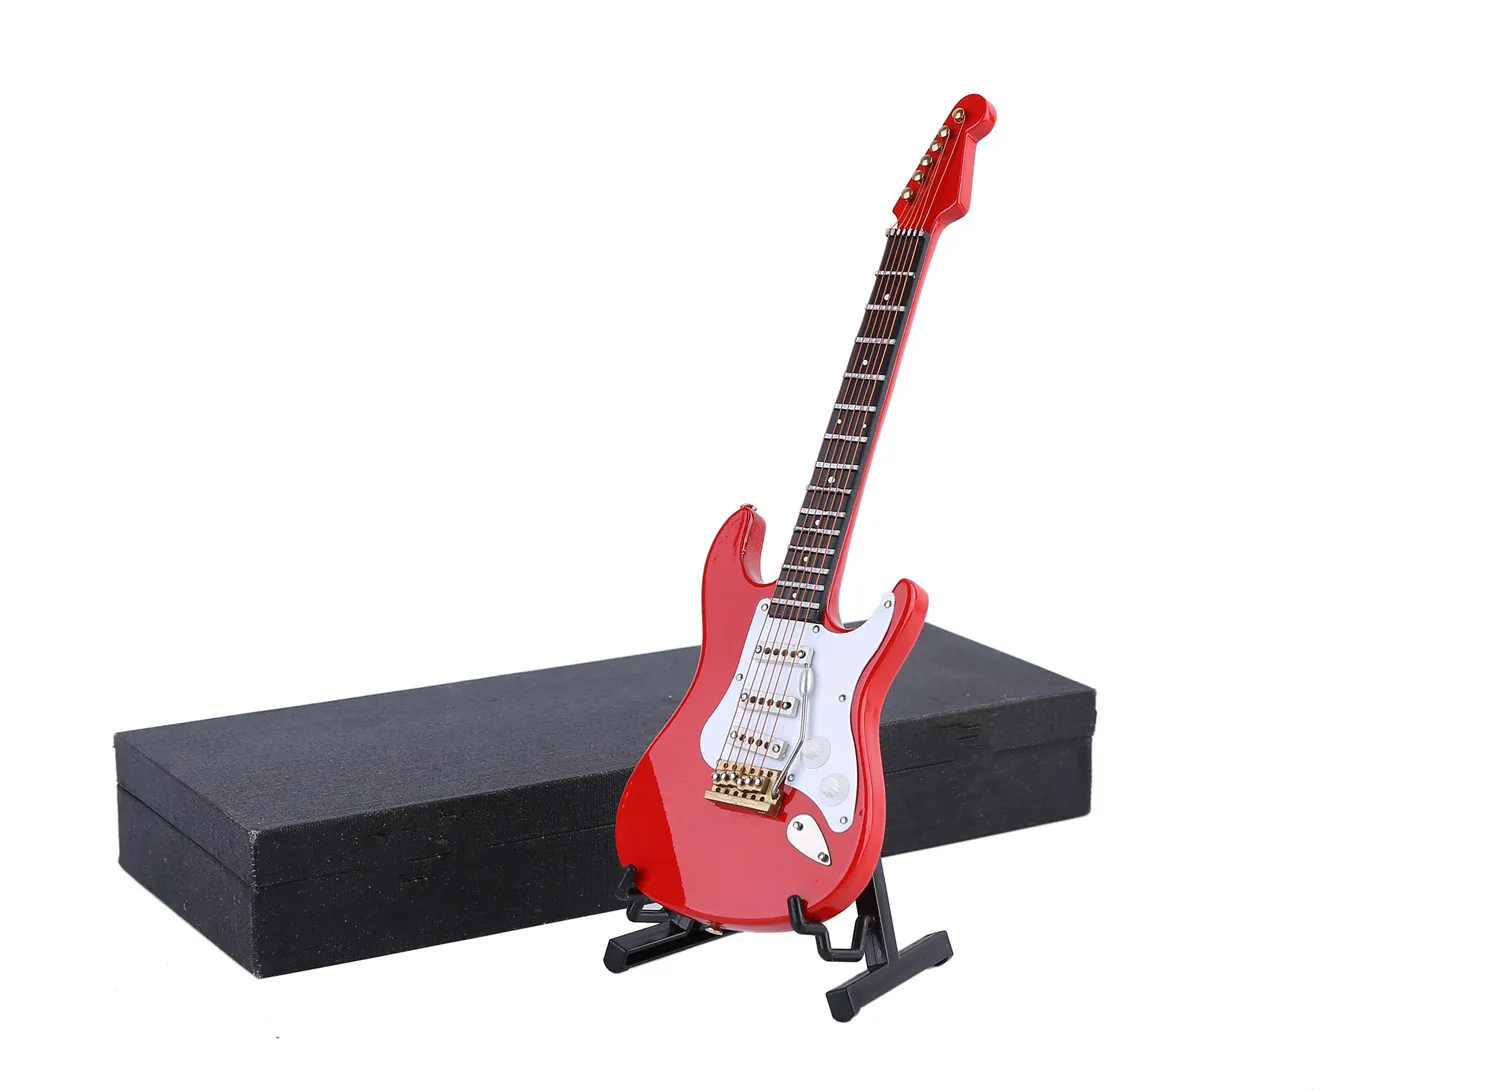 mini people figurines Mini Electric Guitar Model Miniature Decoration Musical Instruments with Case and Stand mini cow figurines